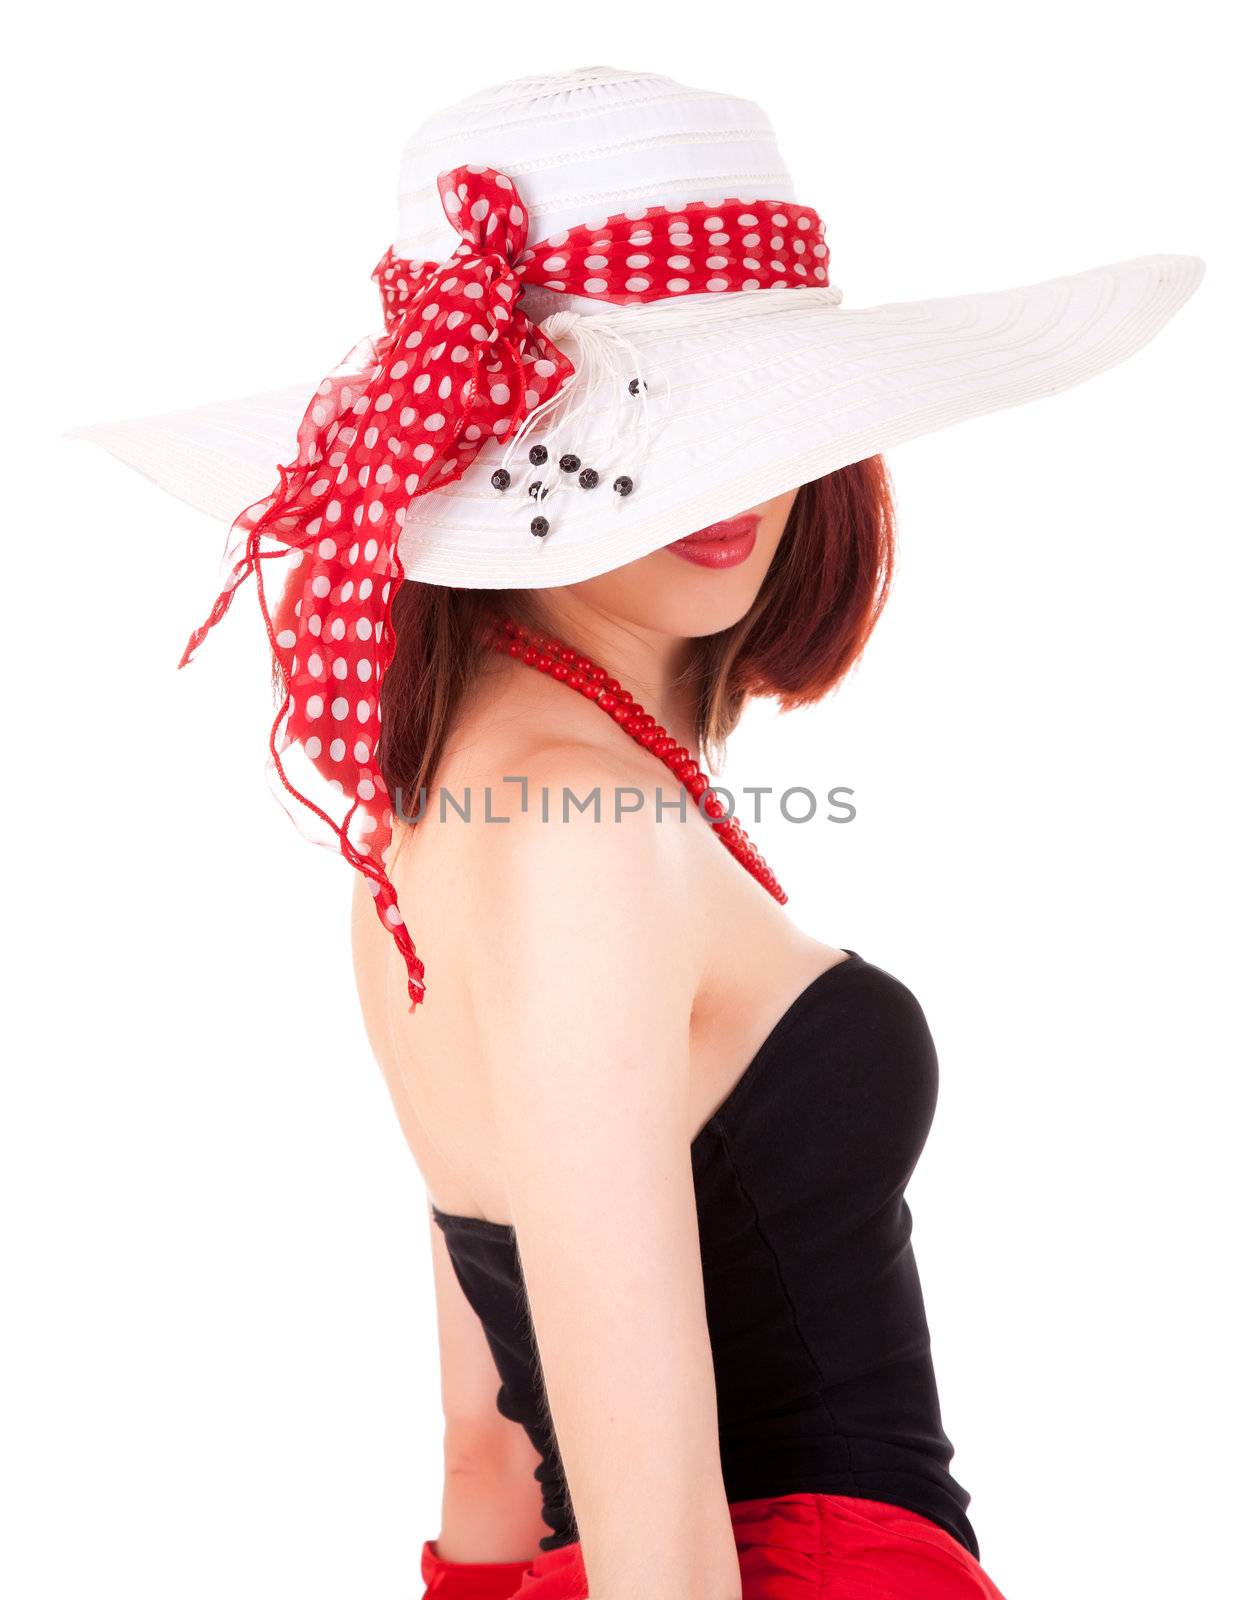 Fashion girl in retro style with bright make-up and big hat on white background